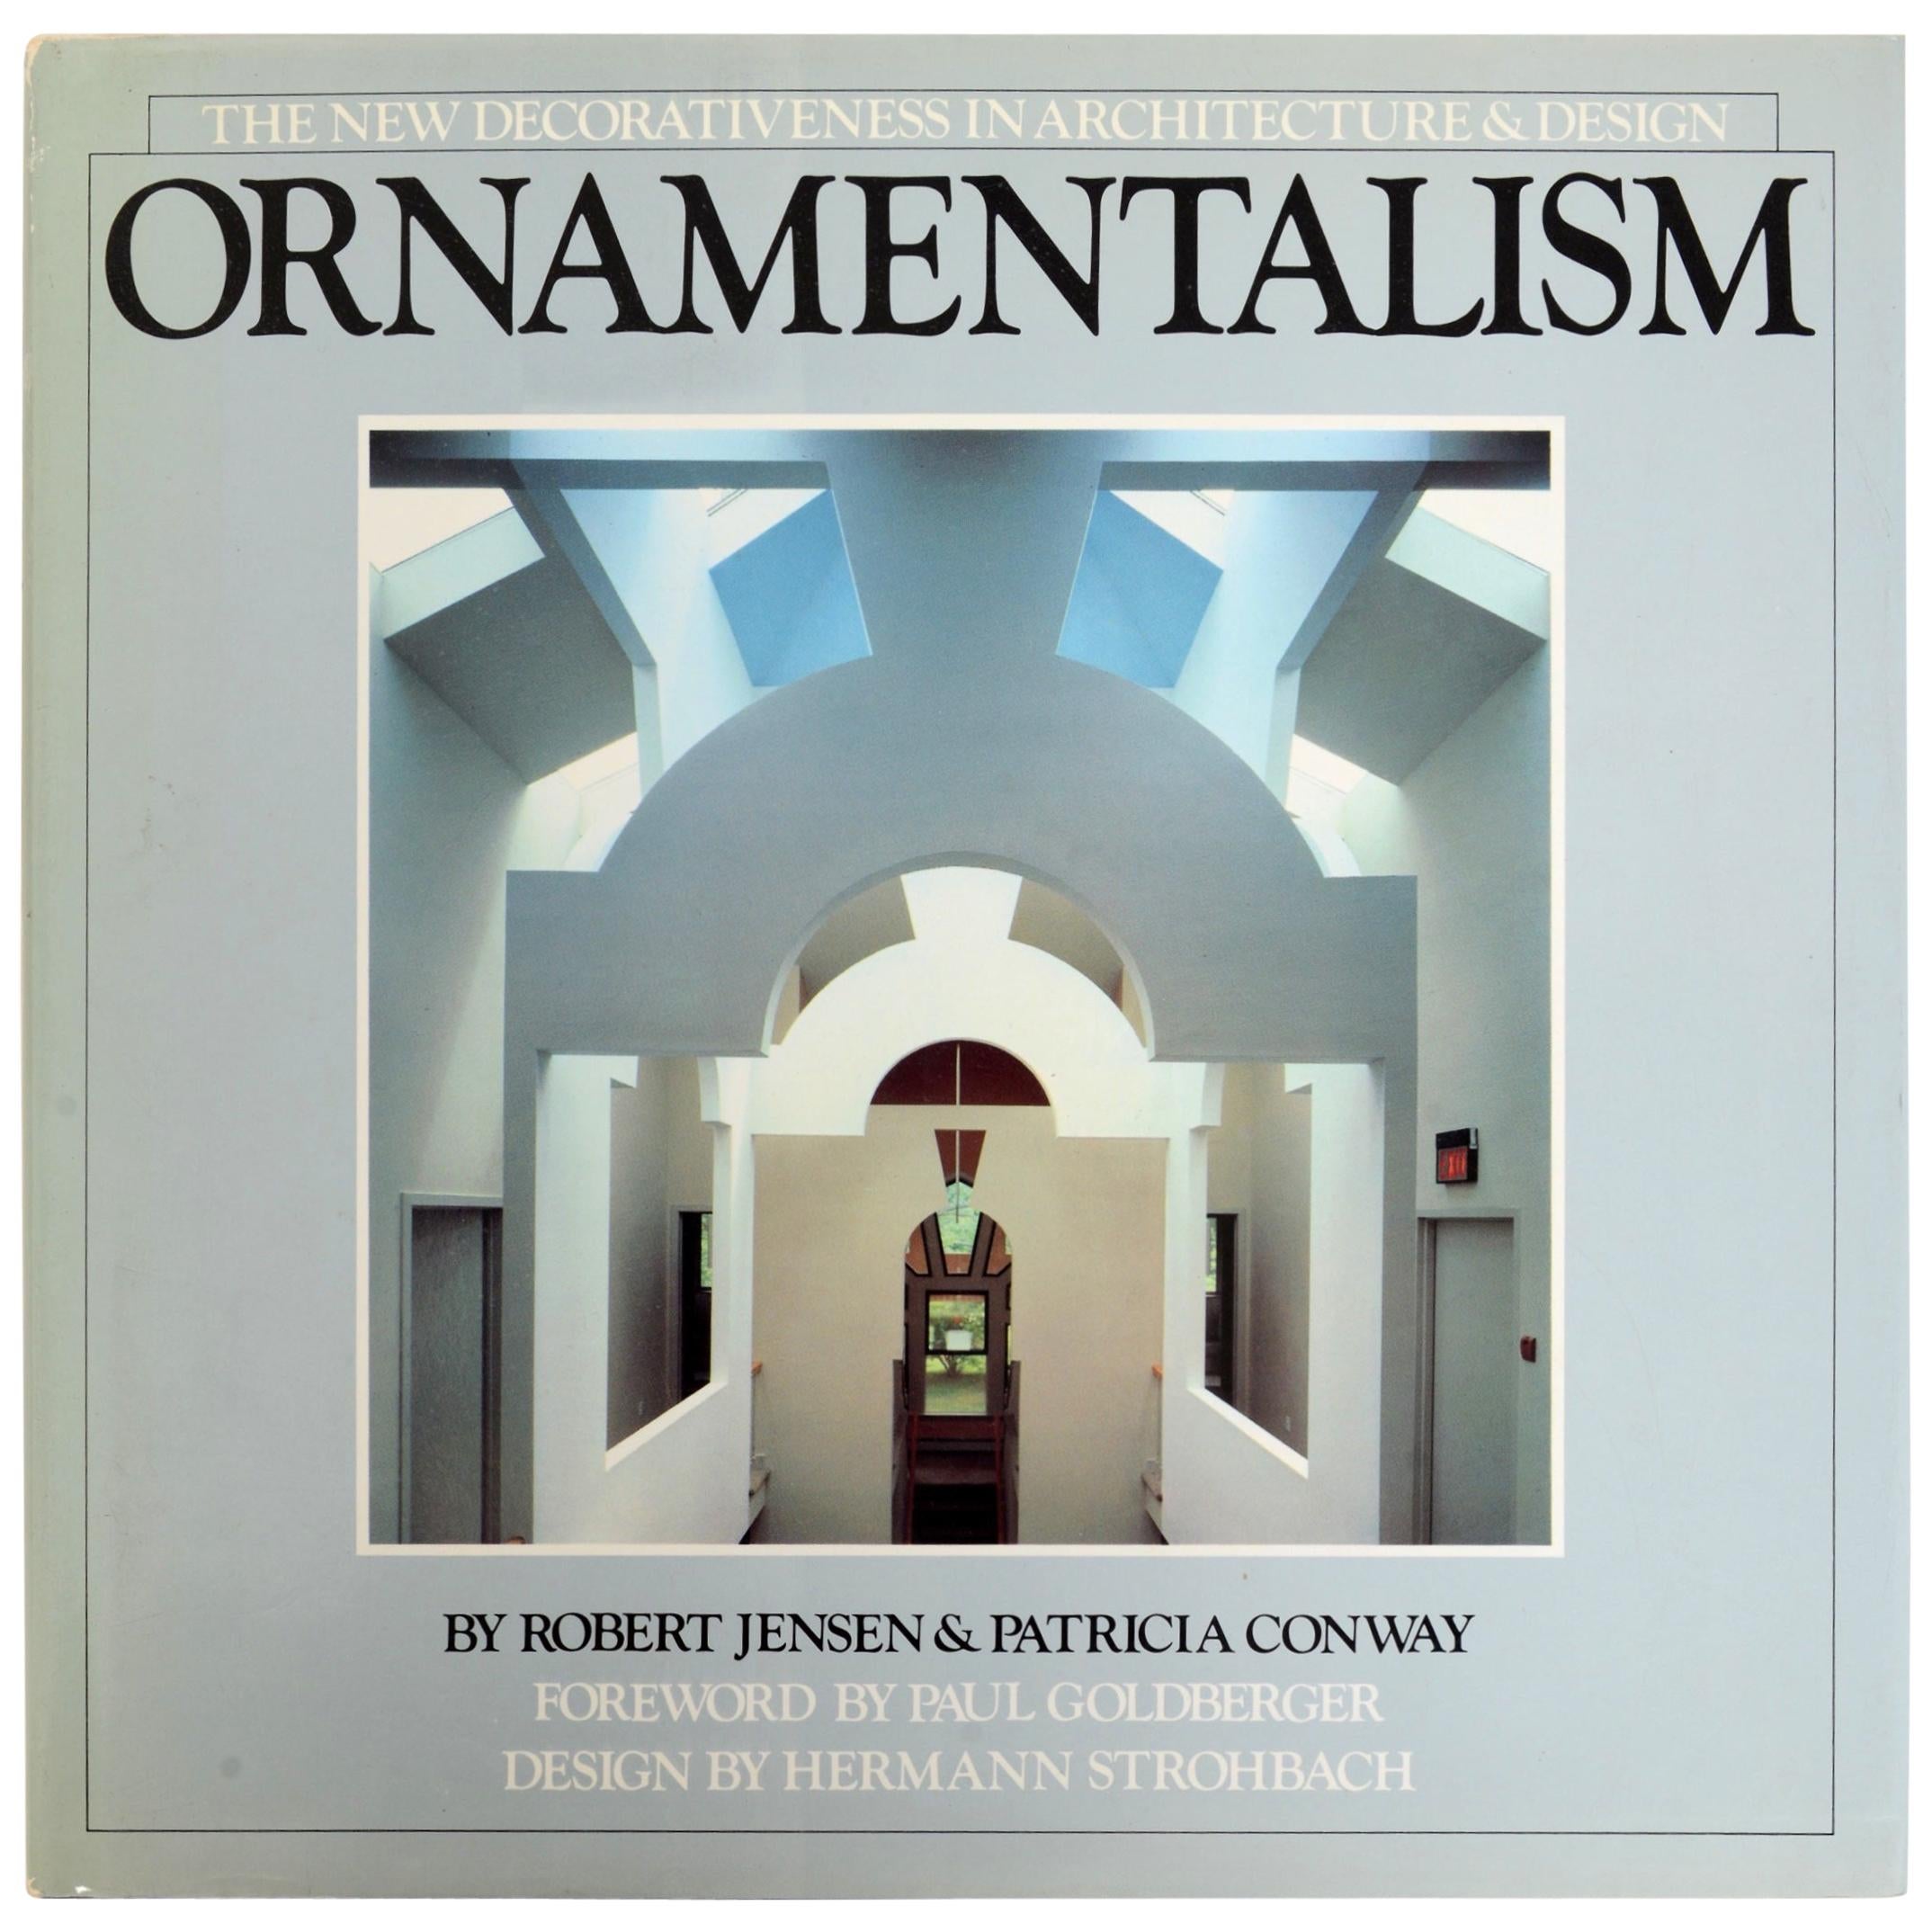 Ornamentalismus The New Decorativeness in Architecture and Design, Stated 1st Ed im Angebot